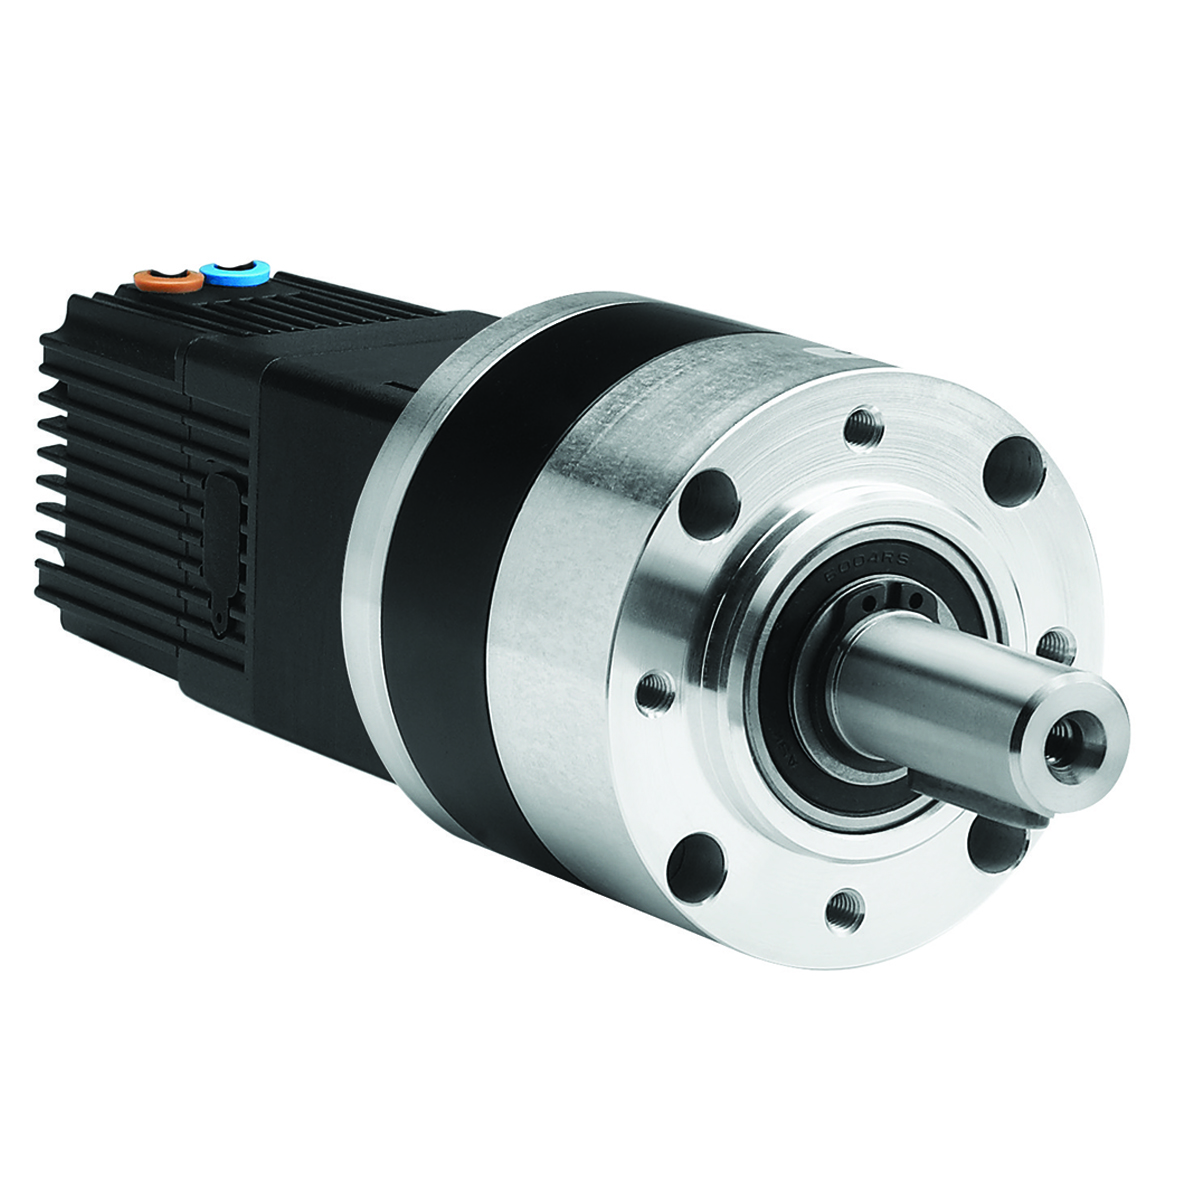 SQ57 Motor 150W 12-32Vdc + Drive TNi21 PWM + Gearbox P81 - 3 stages ratio 99.52-1